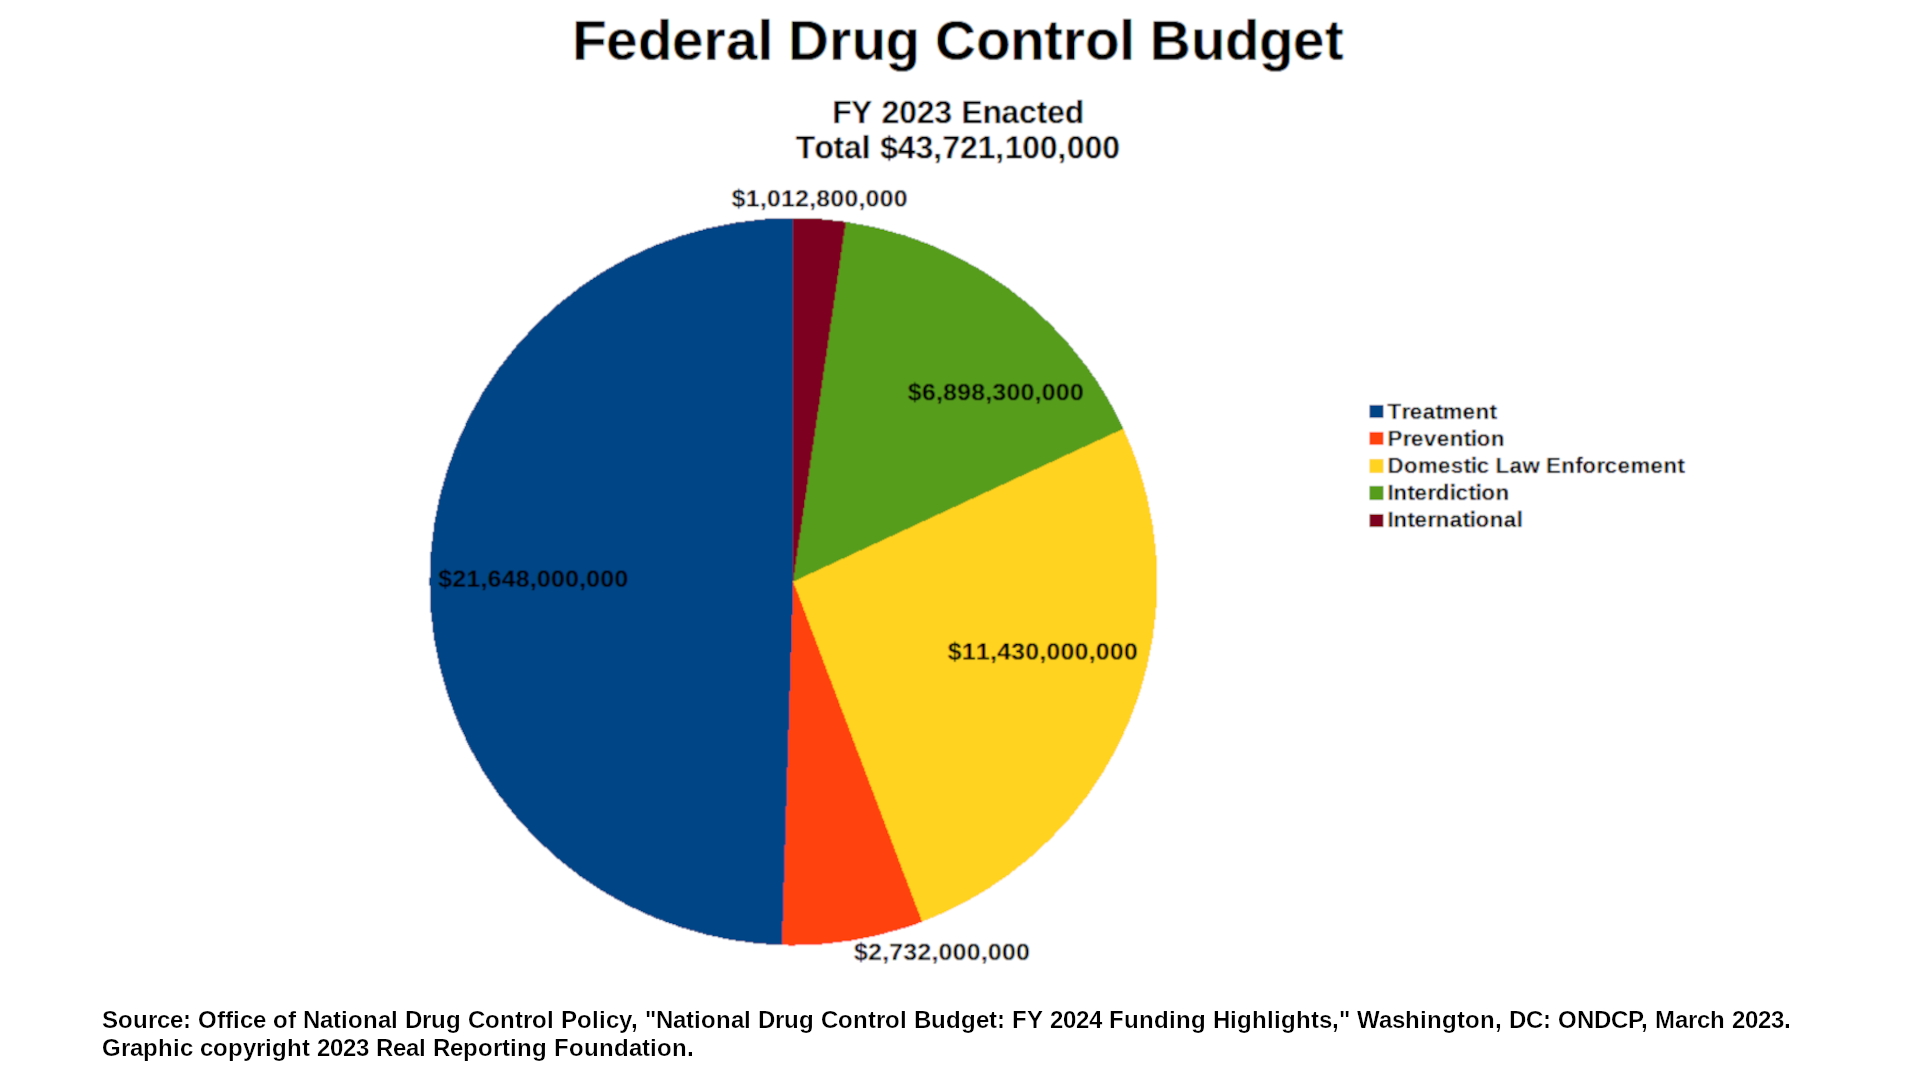 Federal Drug Control Budget FY 2023 Enacted Total $43,721,100,000 Treatment: $21,648,000,000 Prevention: $2,732,000,000 Domestic Law Enforcement: $11,430,000,000 Interdiction: $6,898,300,000 International: $1,012,800,000 Source: Office of National Drug Control Policy, "National Drug Control Budget: FY 2024 Funding Highlights," Washington, DC: ONDCP, March 2023. graphic copyright 2023 Real Reporting Foundation